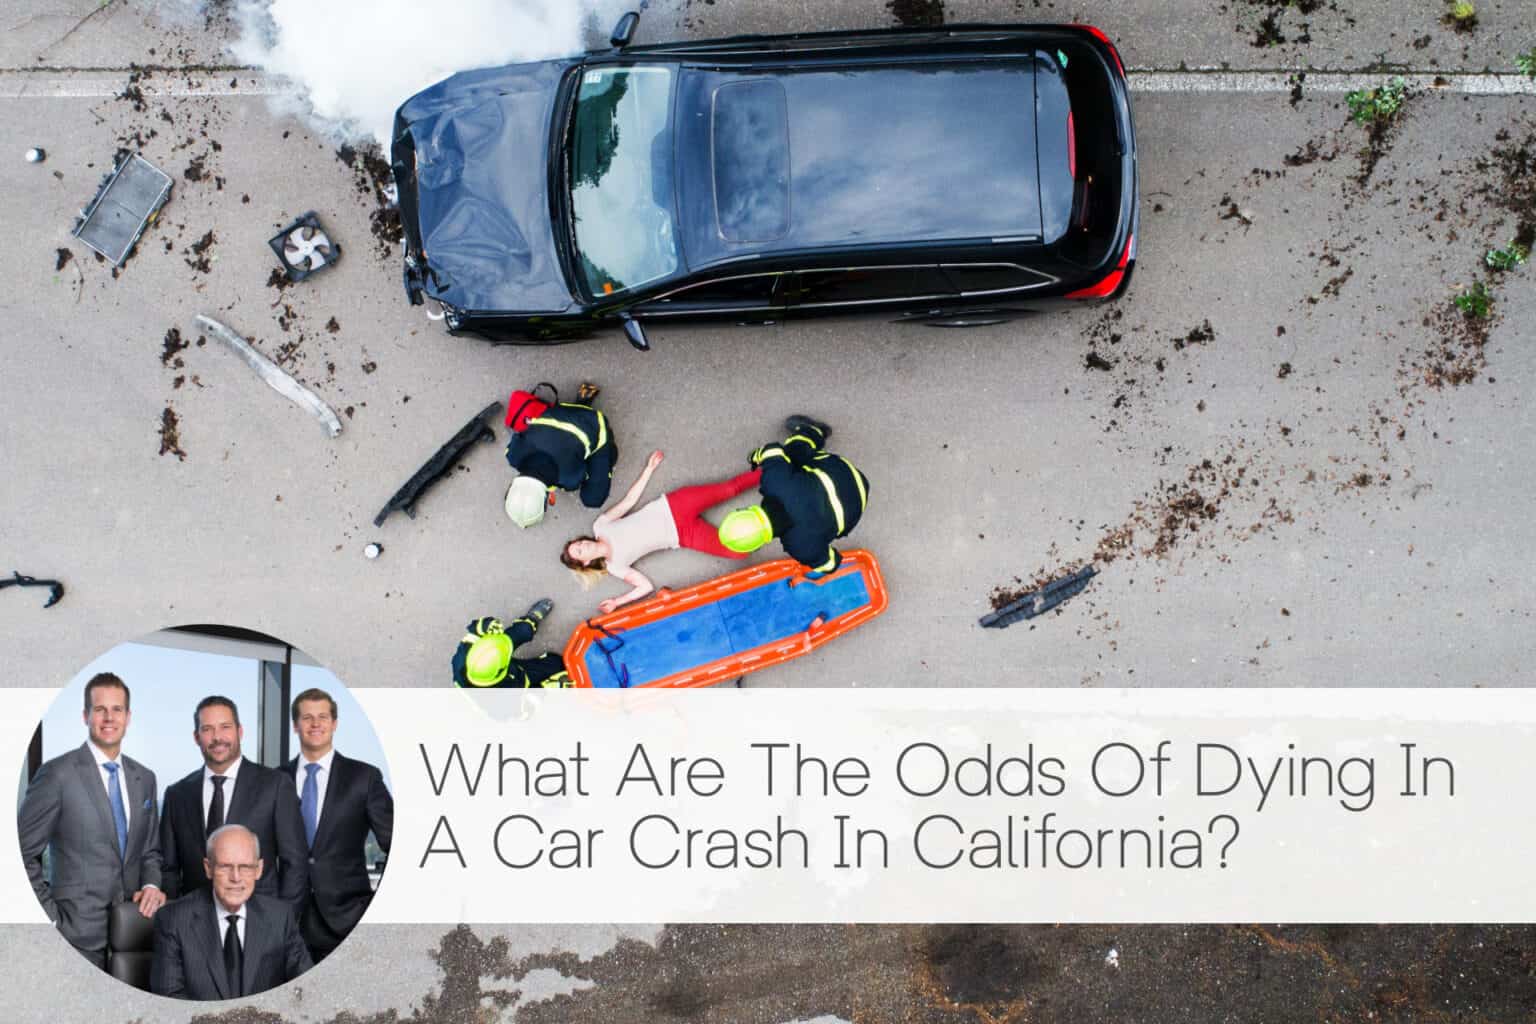 odds of dying in a car crash, california